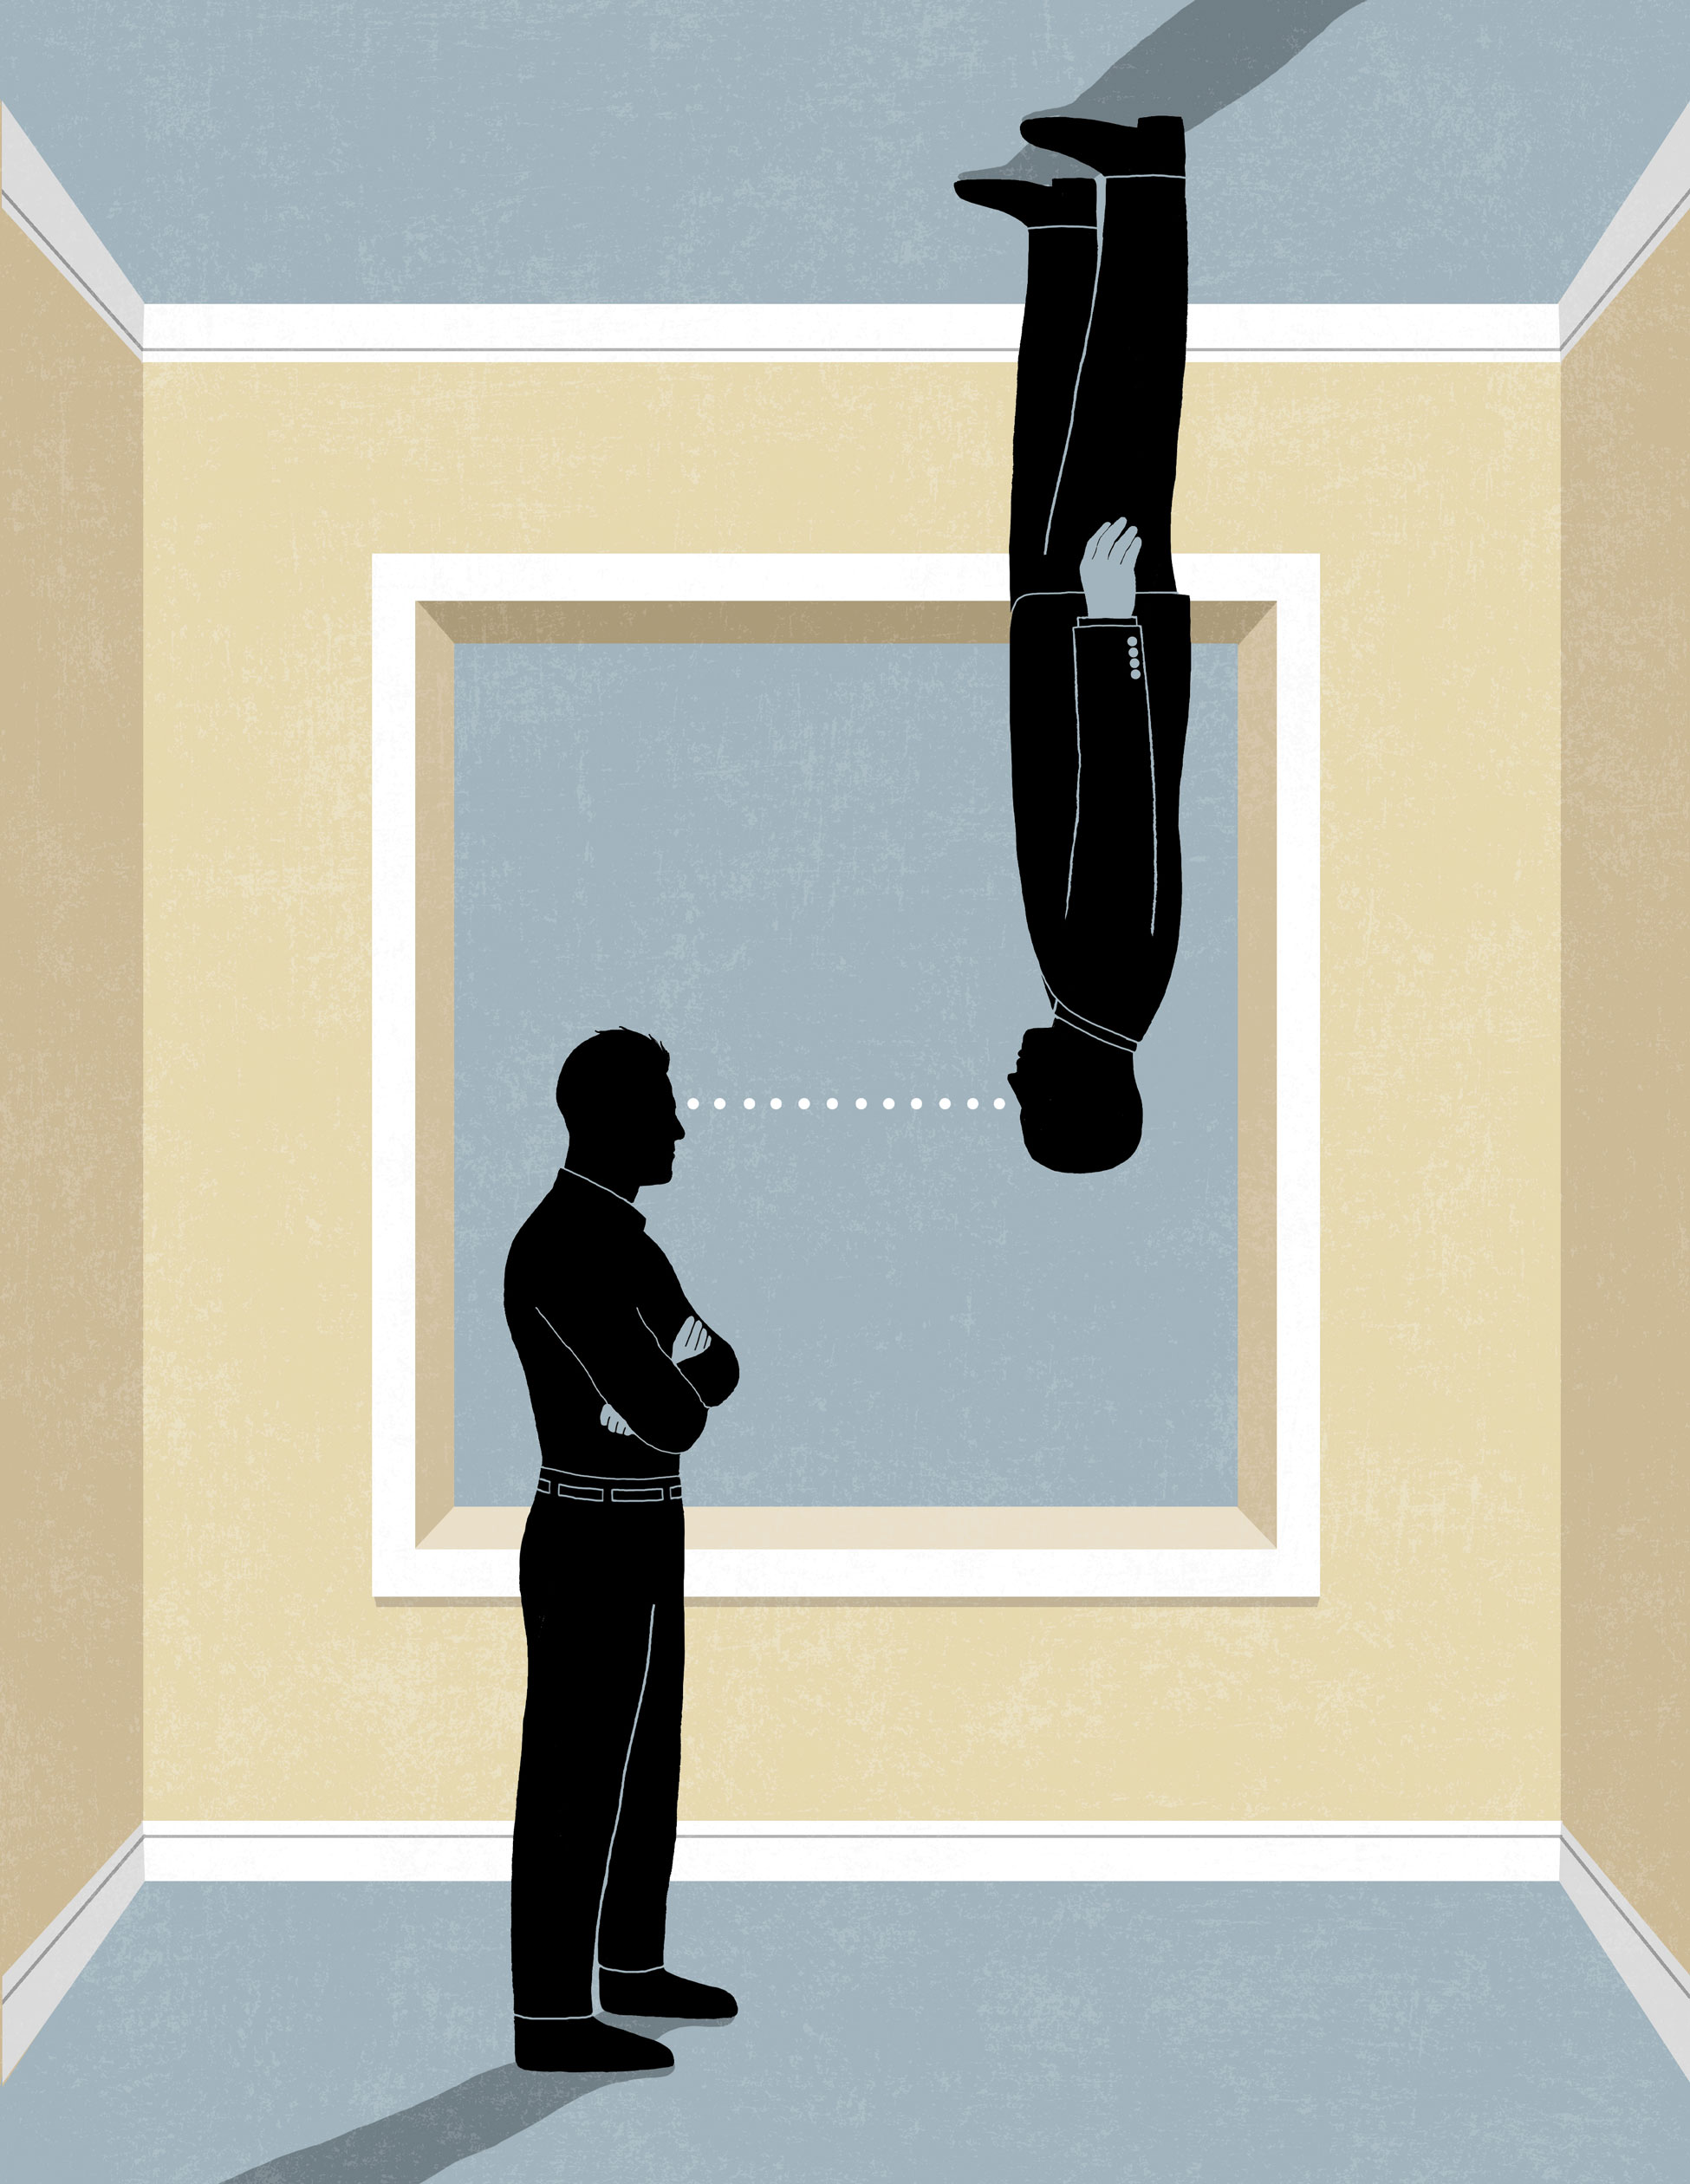 illustration of two silhouettes of people, one standing on the floor and the other on the ceiling, with their lines of site aligning with a dotted white line, illustration by James Steinberg